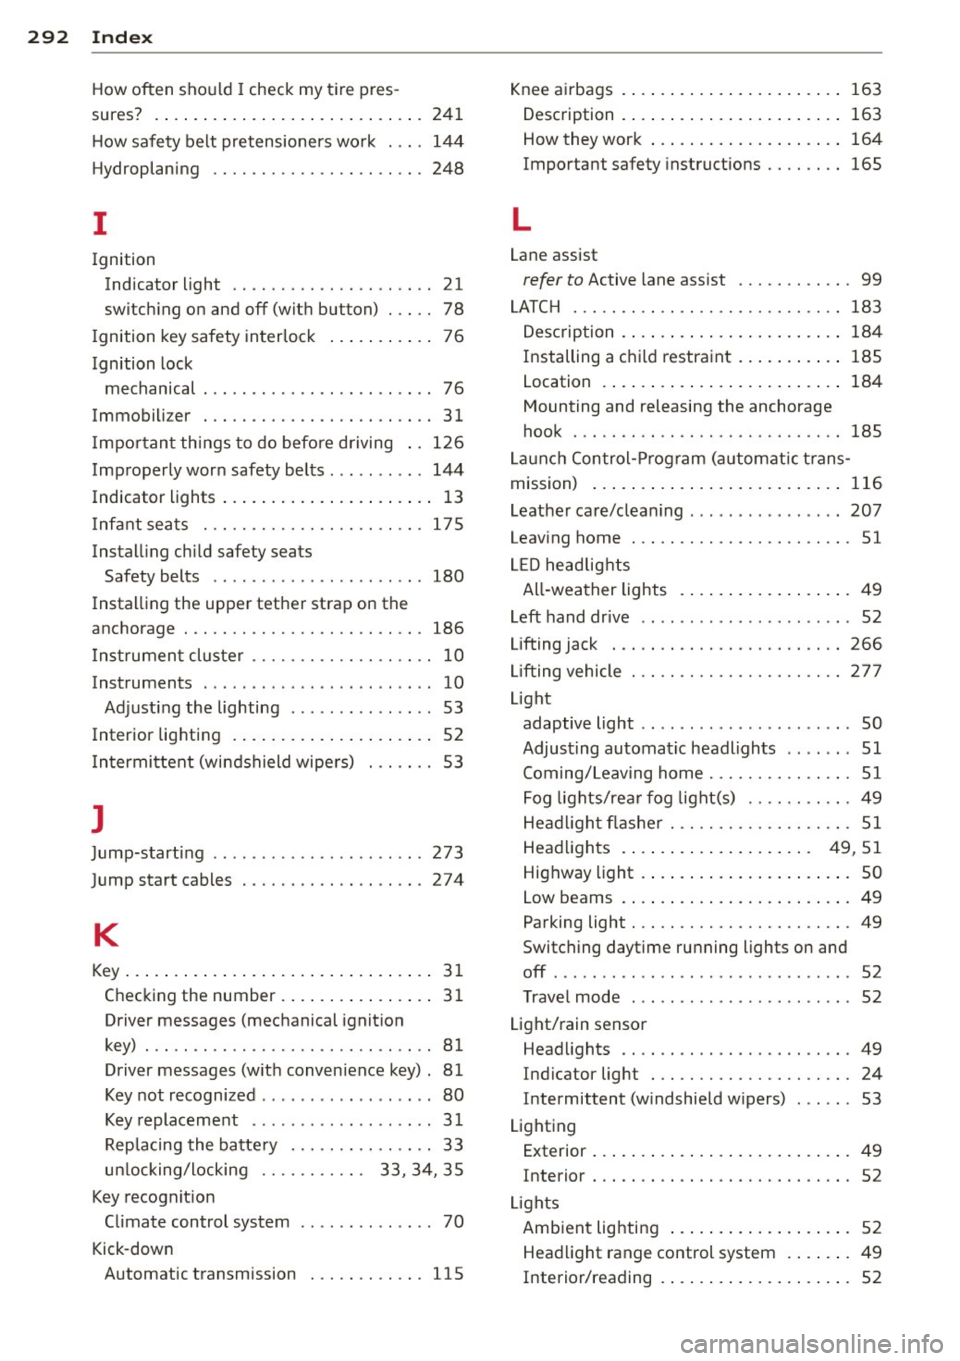 AUDI A3 CABRIOLET 2015  Owners Manual 292  Index 
How often  should I check my tire  pres -
sures?  . ..... ... ............. ..... . 
241 
How safety  belt  pretensioners  work  ... . 144 
Hydroplaning  ................. .... . 248 
I 
I